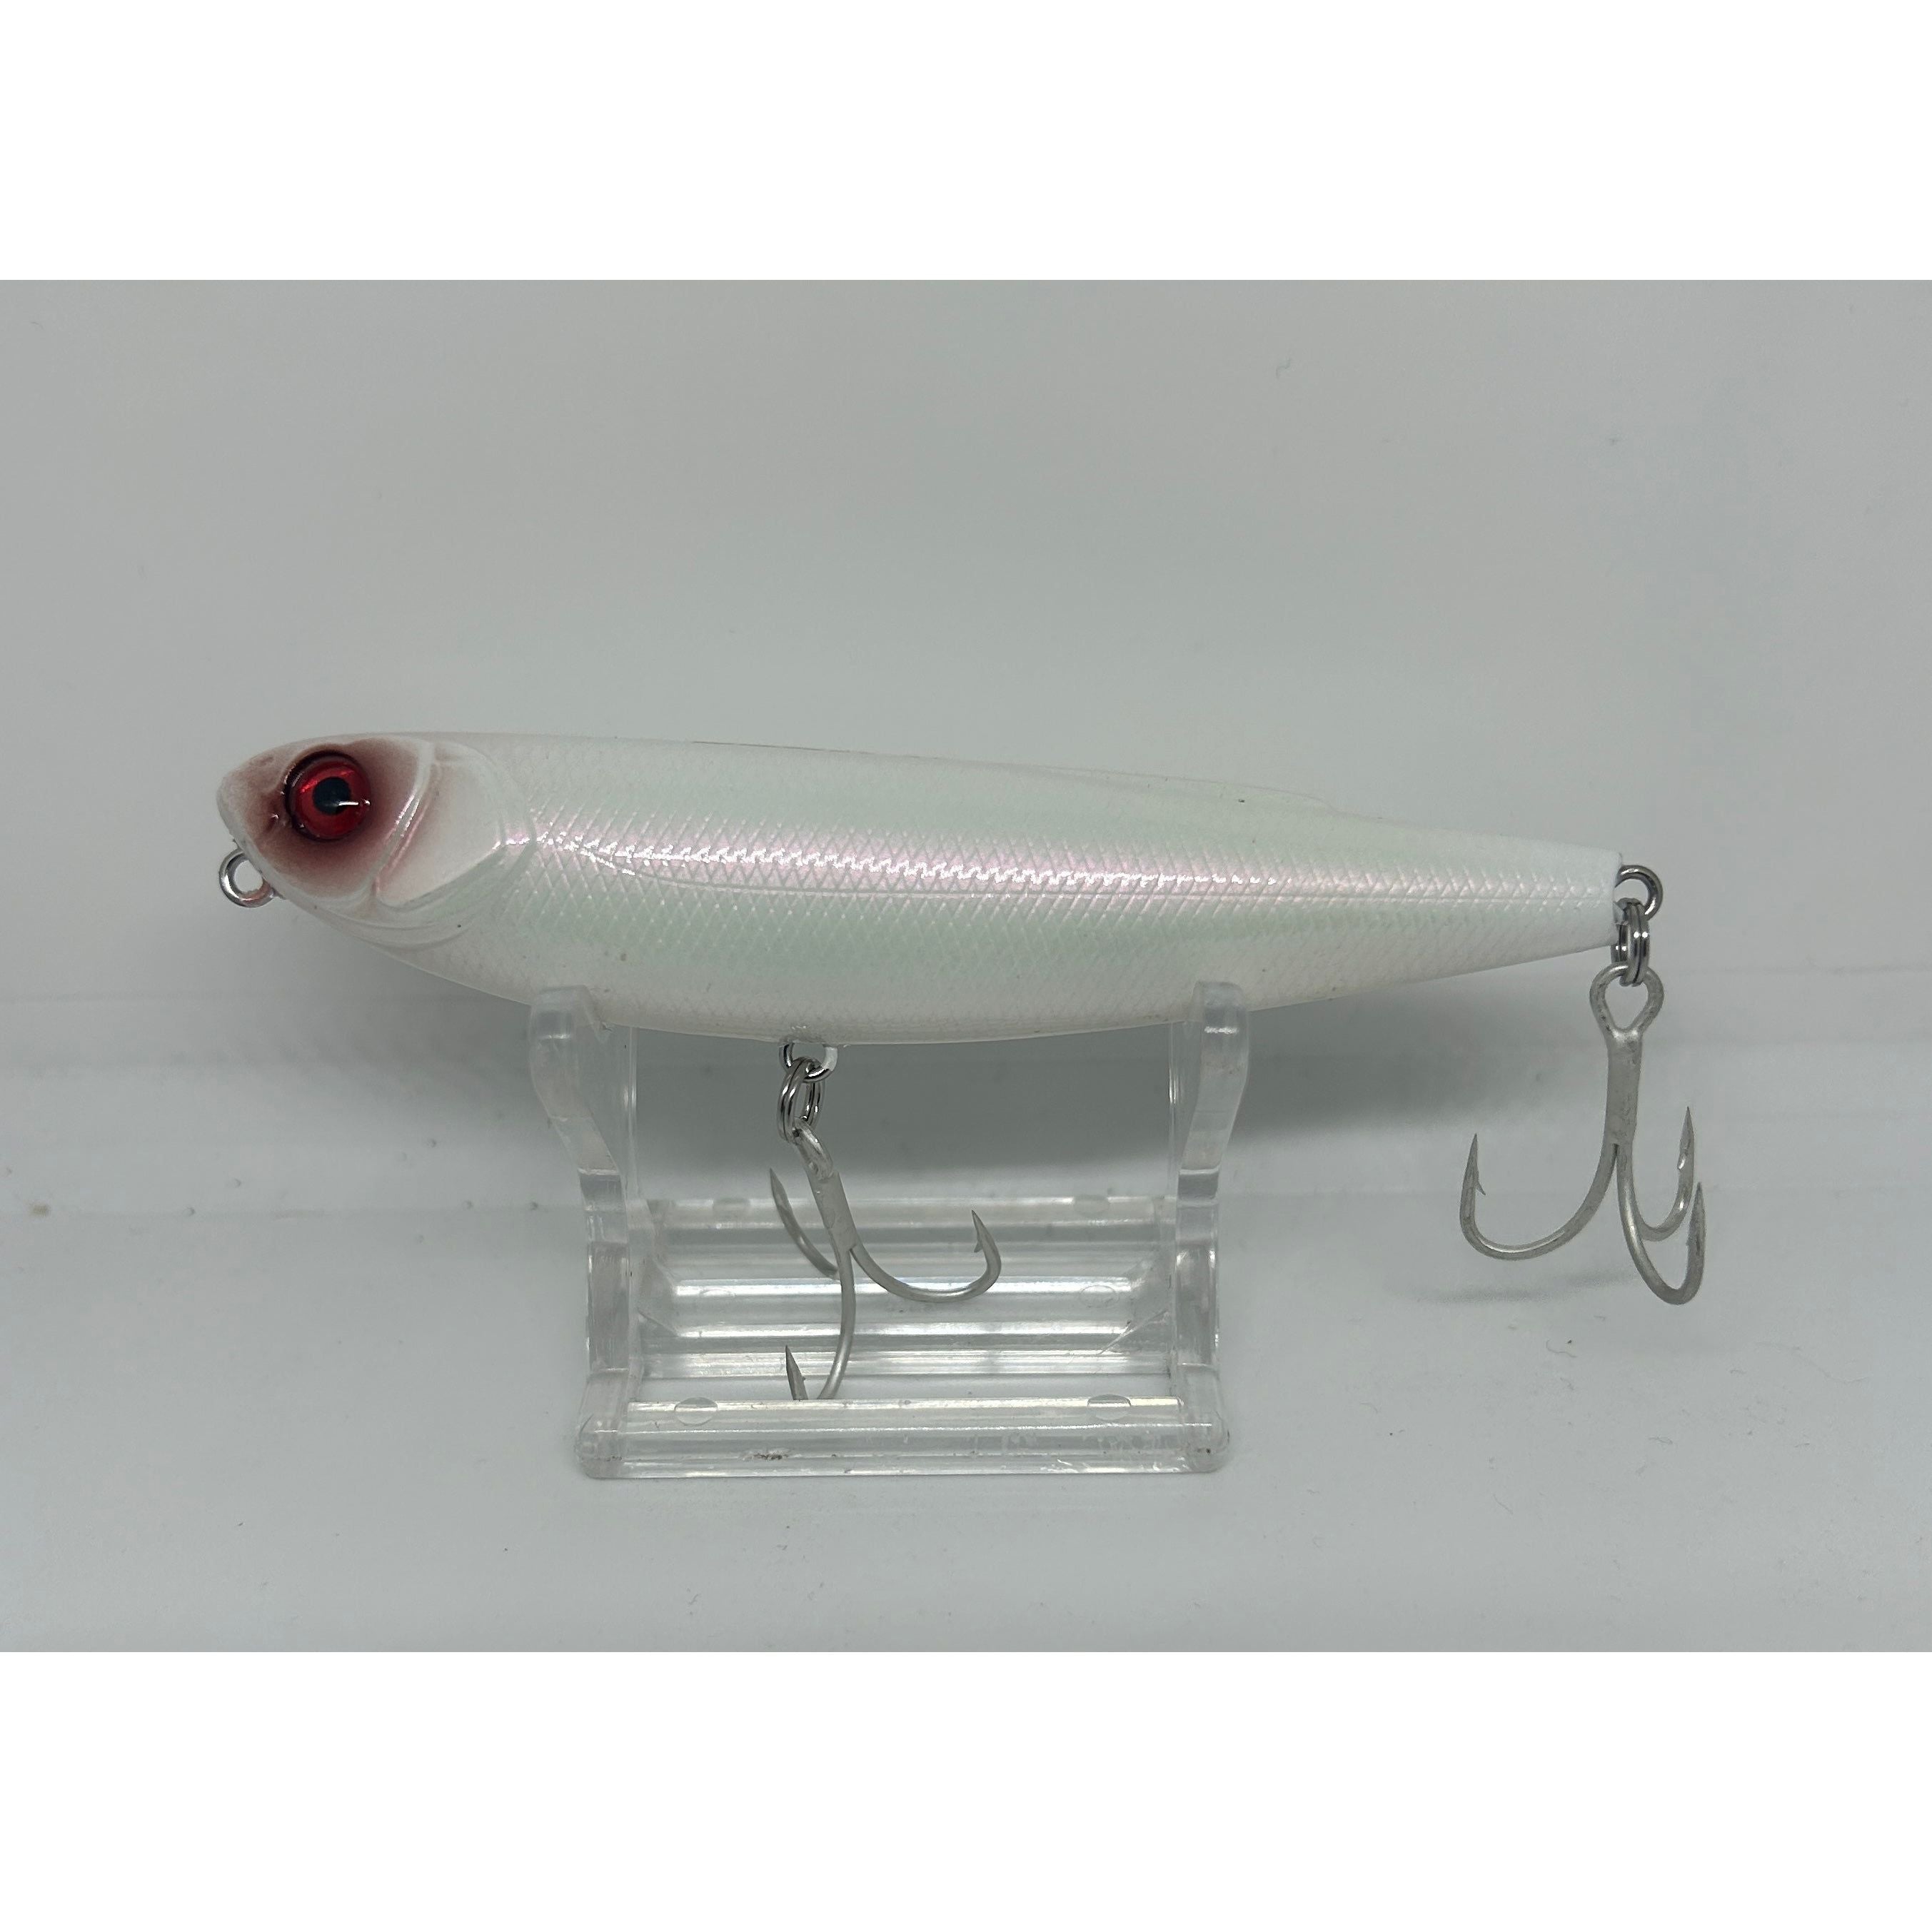 Small Surface Dog Bass Lure 95mm 15g